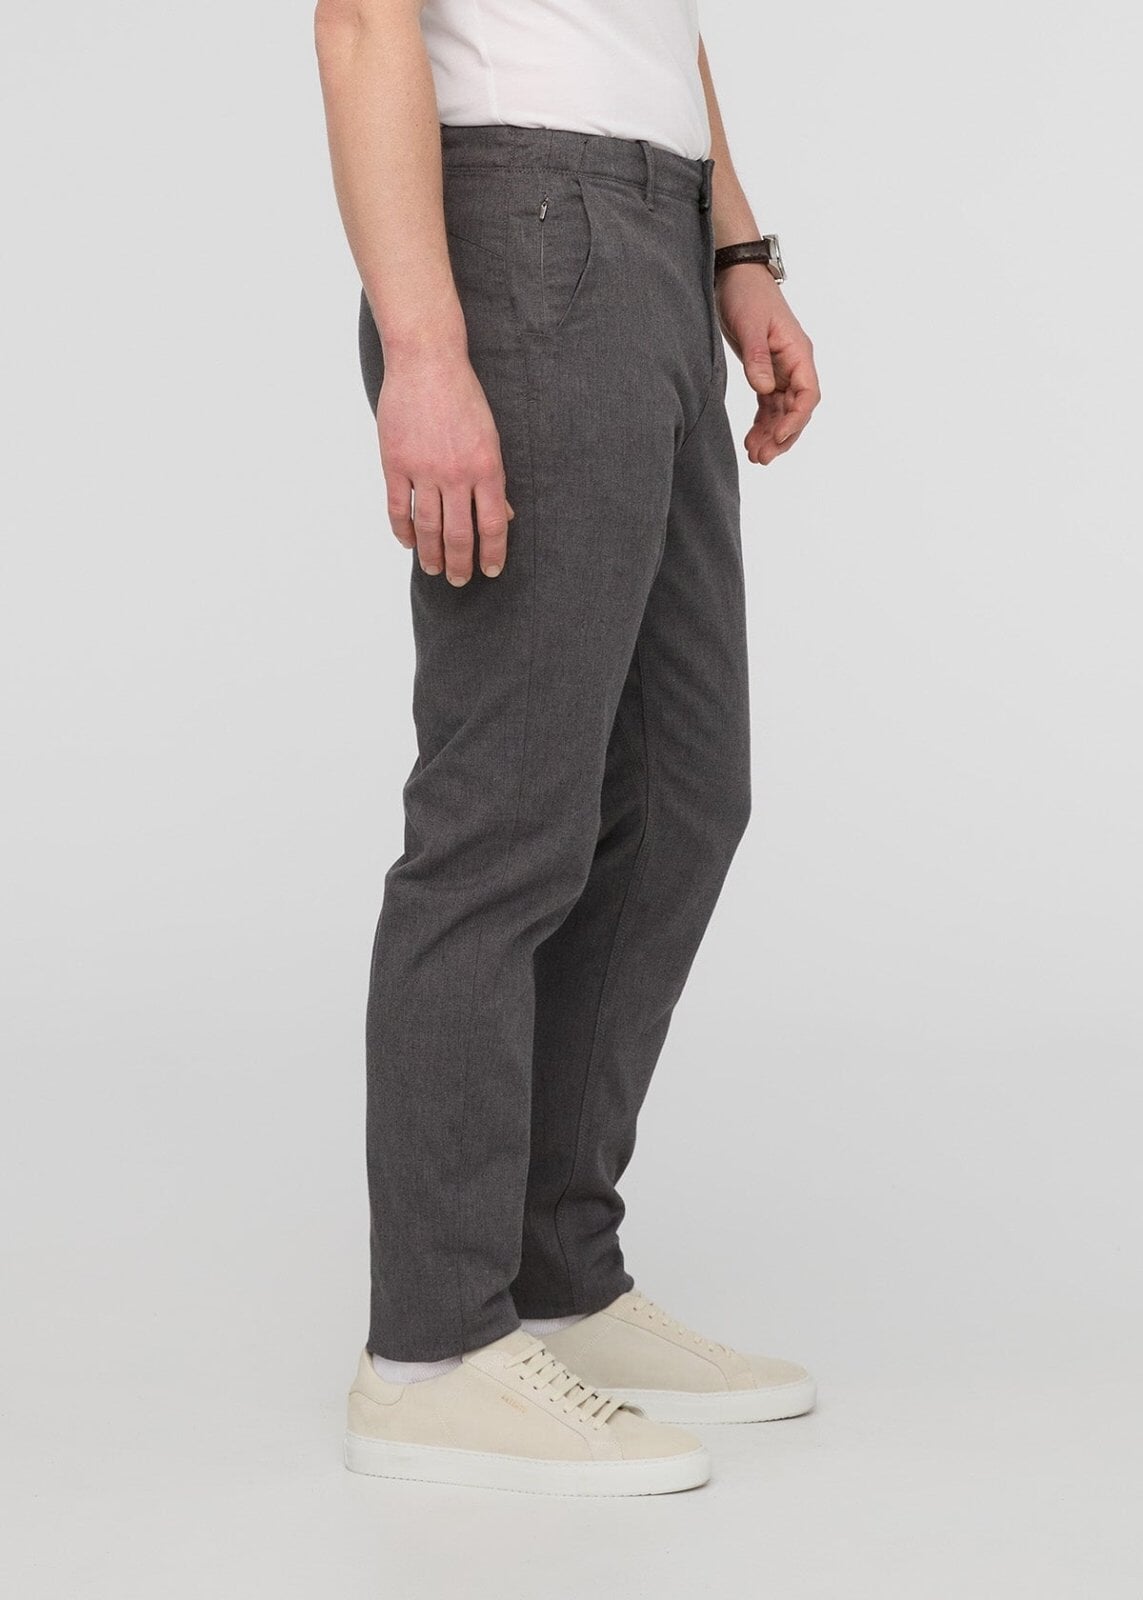 all in motion, Pants & Jumpsuits, All In Motion Womens Midrise Jogger Pants  Large Heather Gray